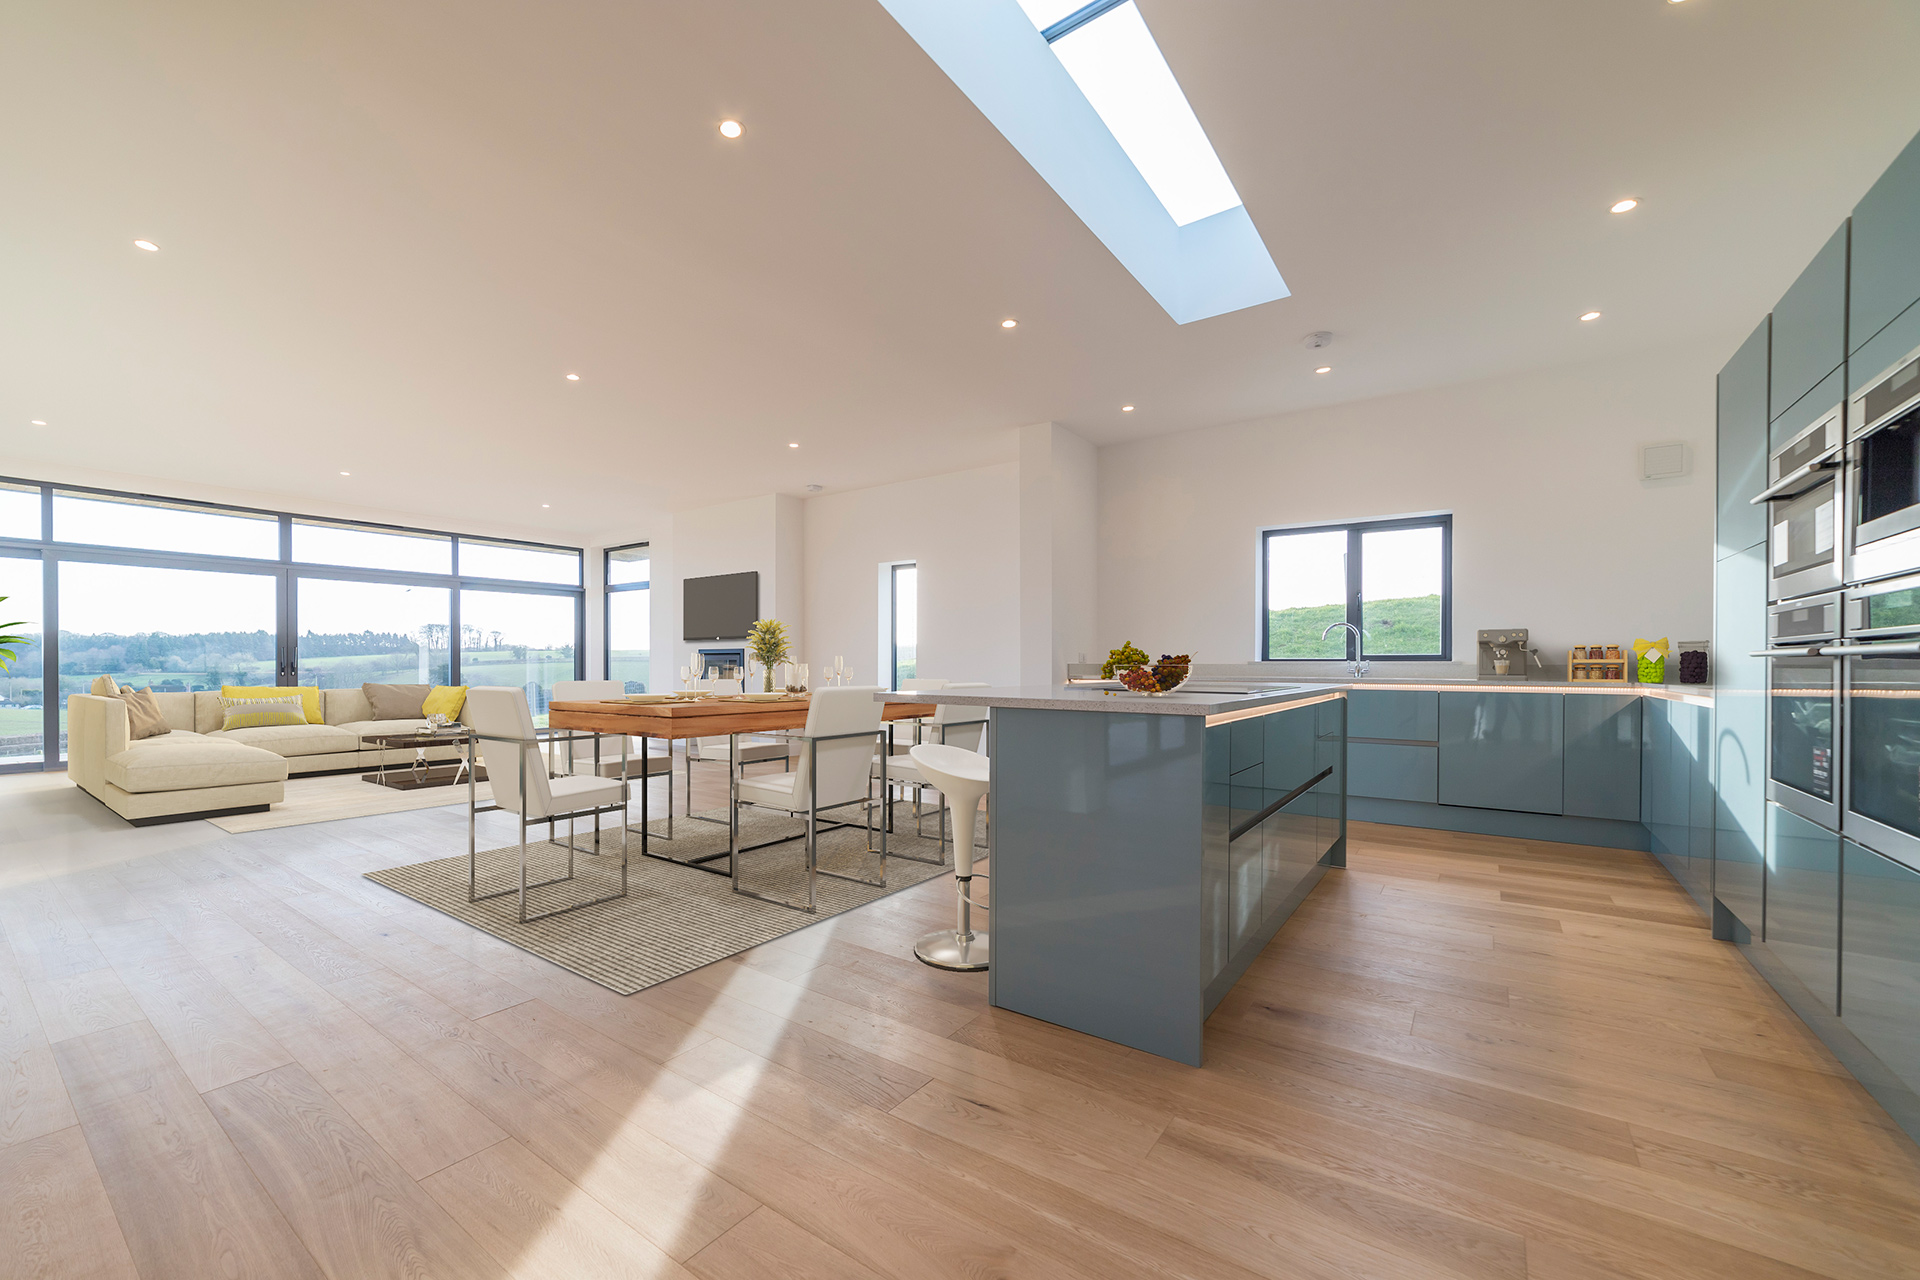 open plan kitchen and living area with skylight and large windows